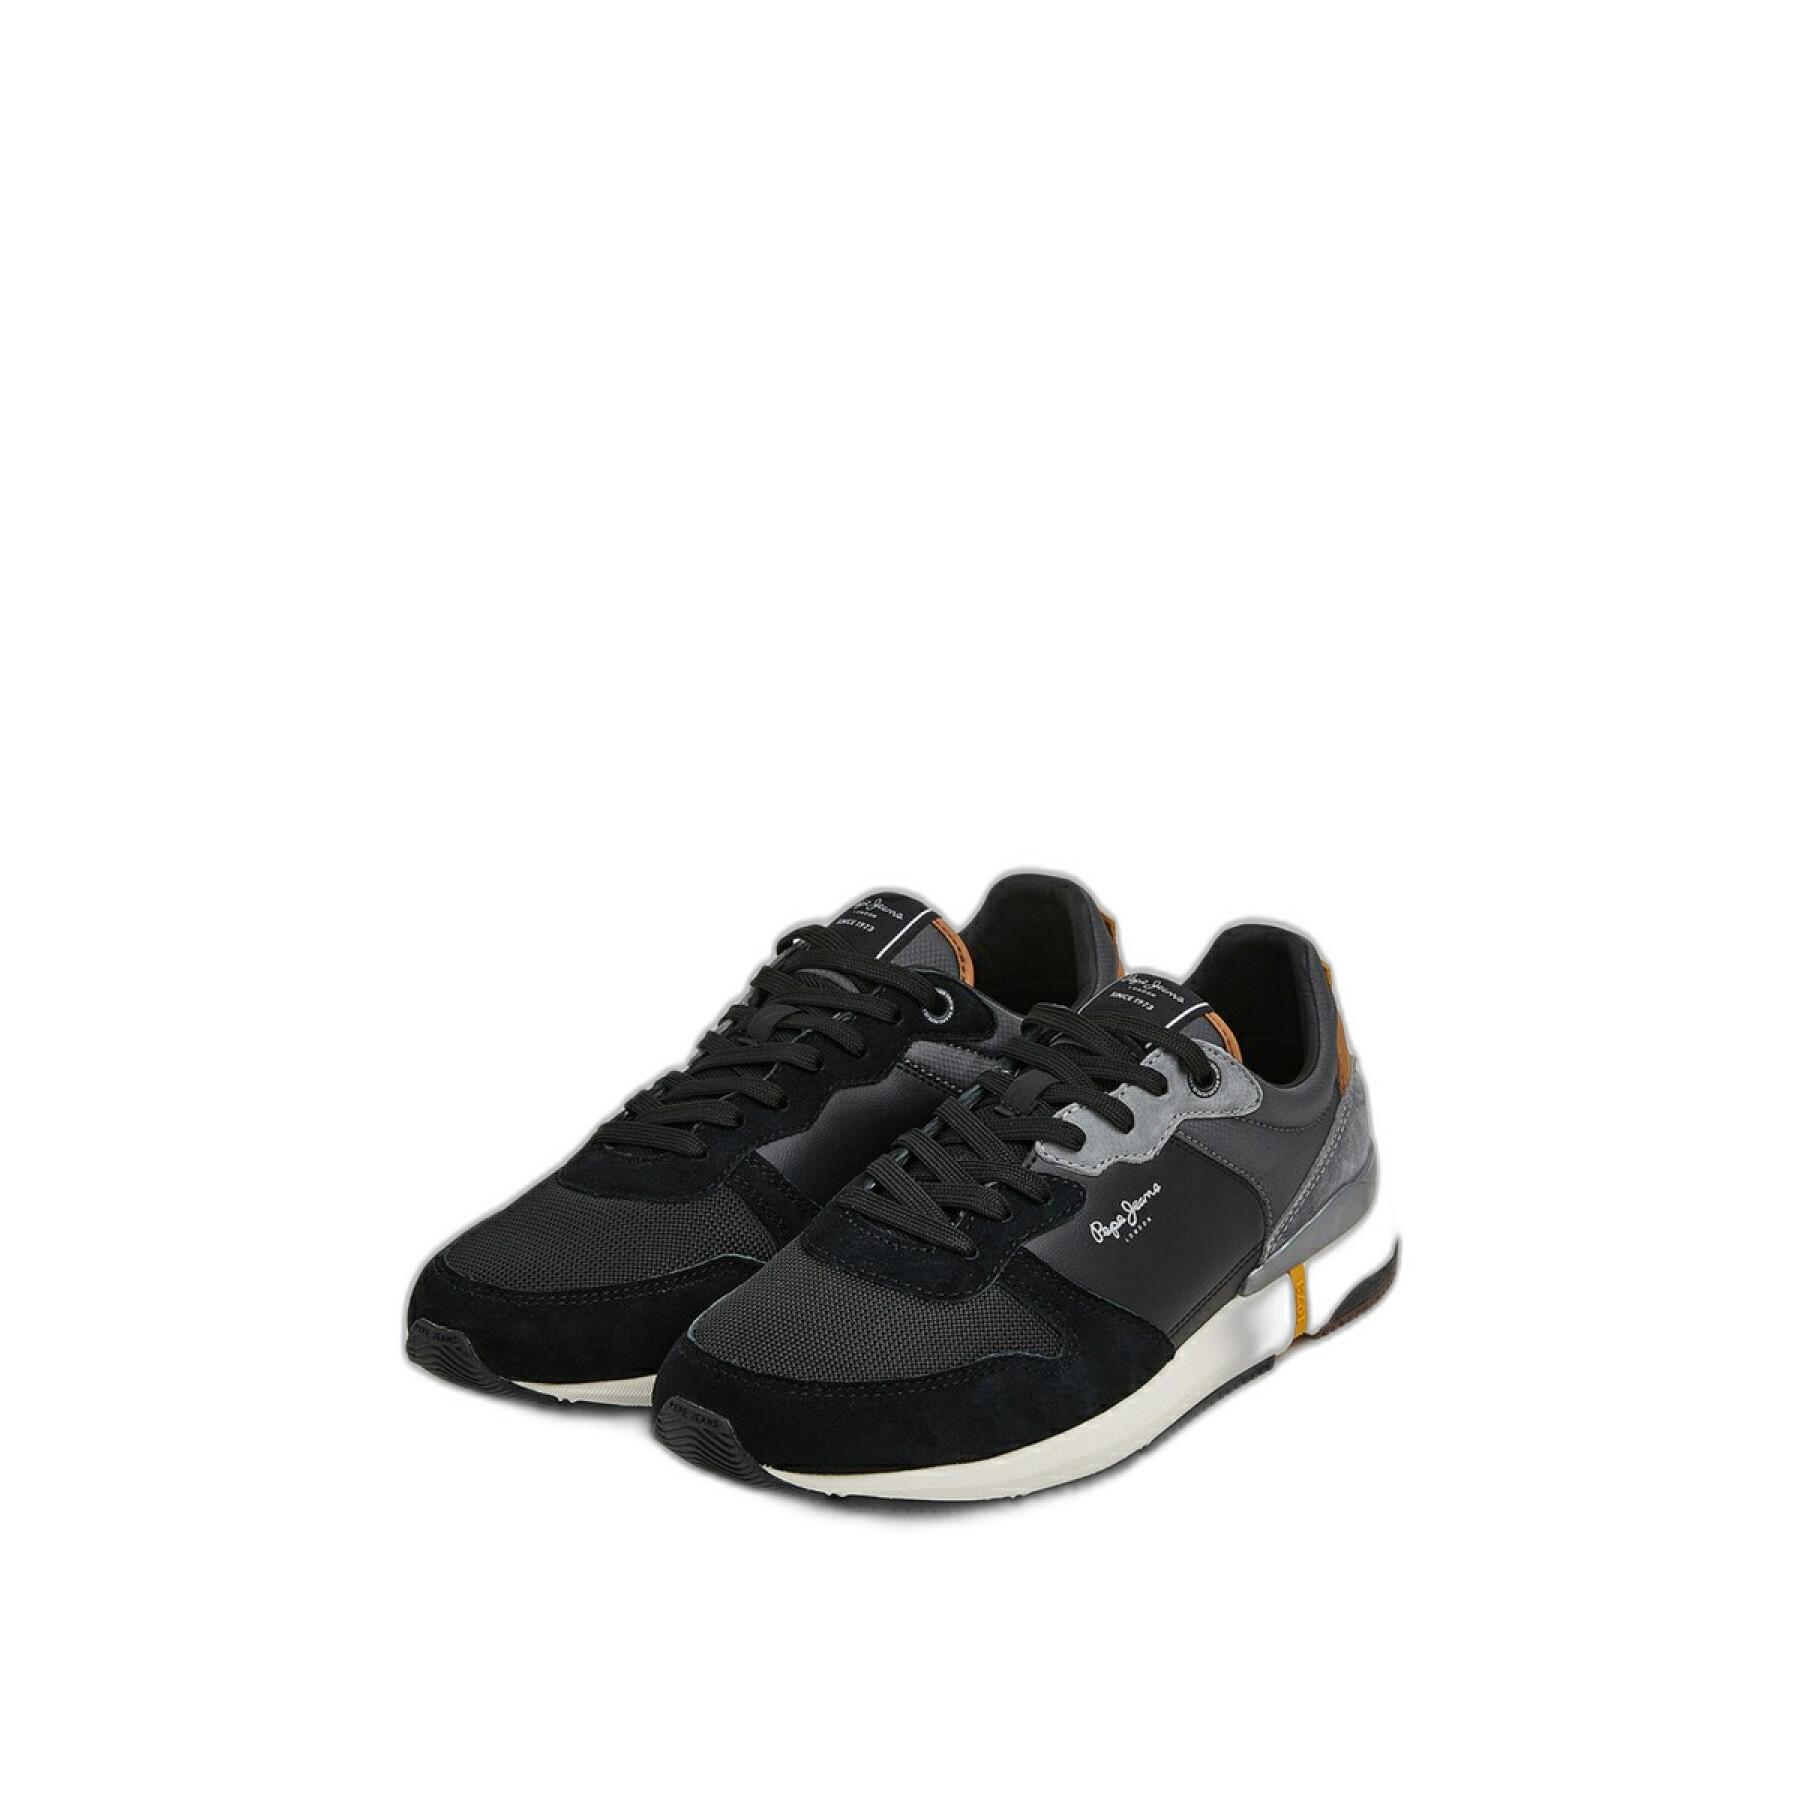 Trainers Pepe Jeans London Pro Basic 22